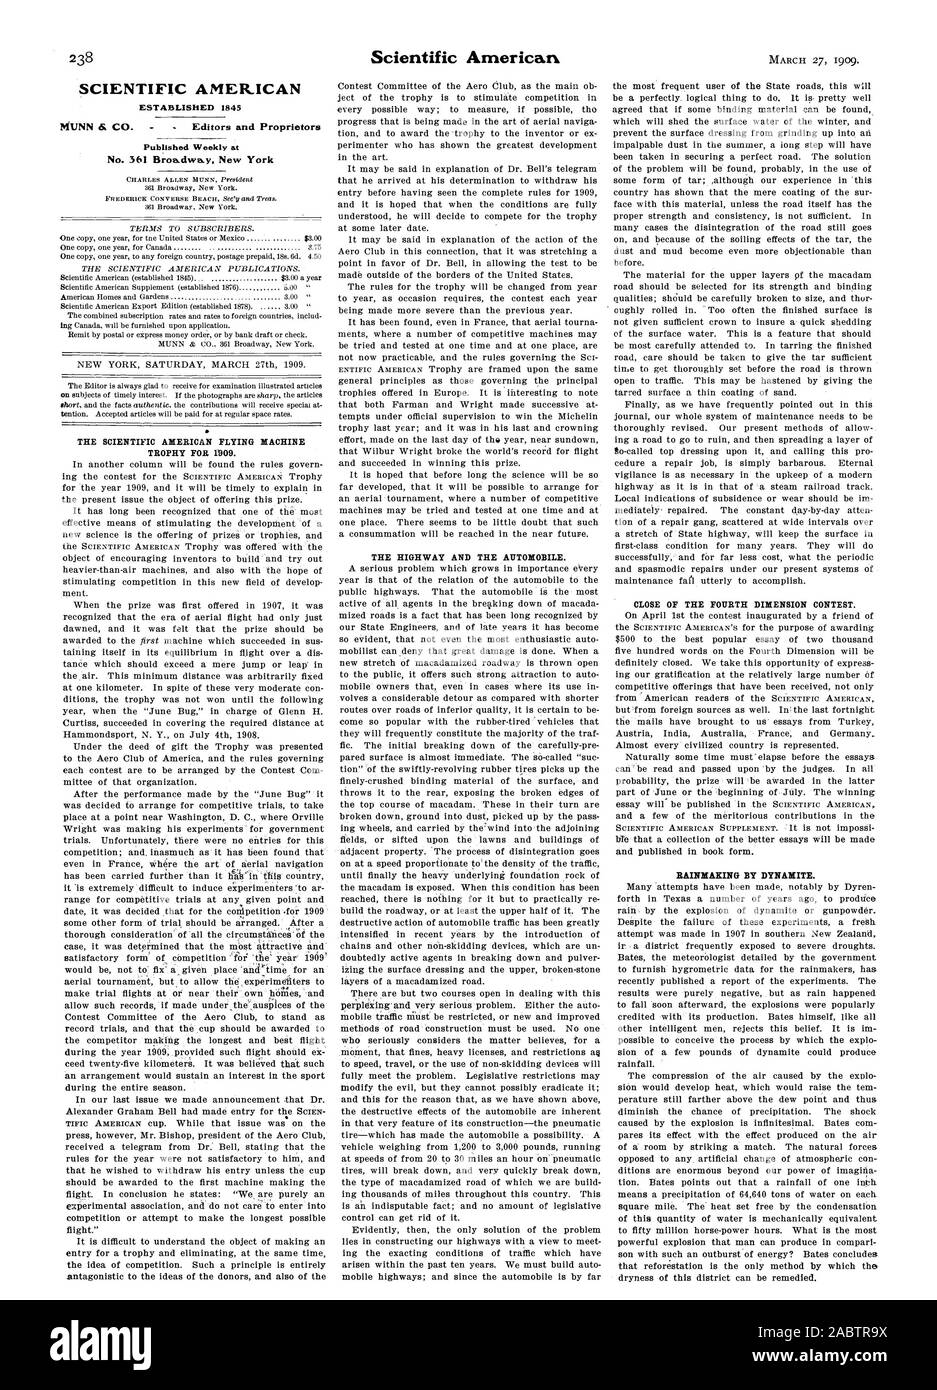 SCIENTIFIC AMERICAN ESTABLISHED 1845 Published Weekly at THE SCIENTIFIC AMERICAN FLYING MACHINE TROPHY FOR 1'909. THE HIGHWAY AND THE AUTOMOBILE. RAINMAKING BY DYNAMITE., -1909-03-27 Stock Photo